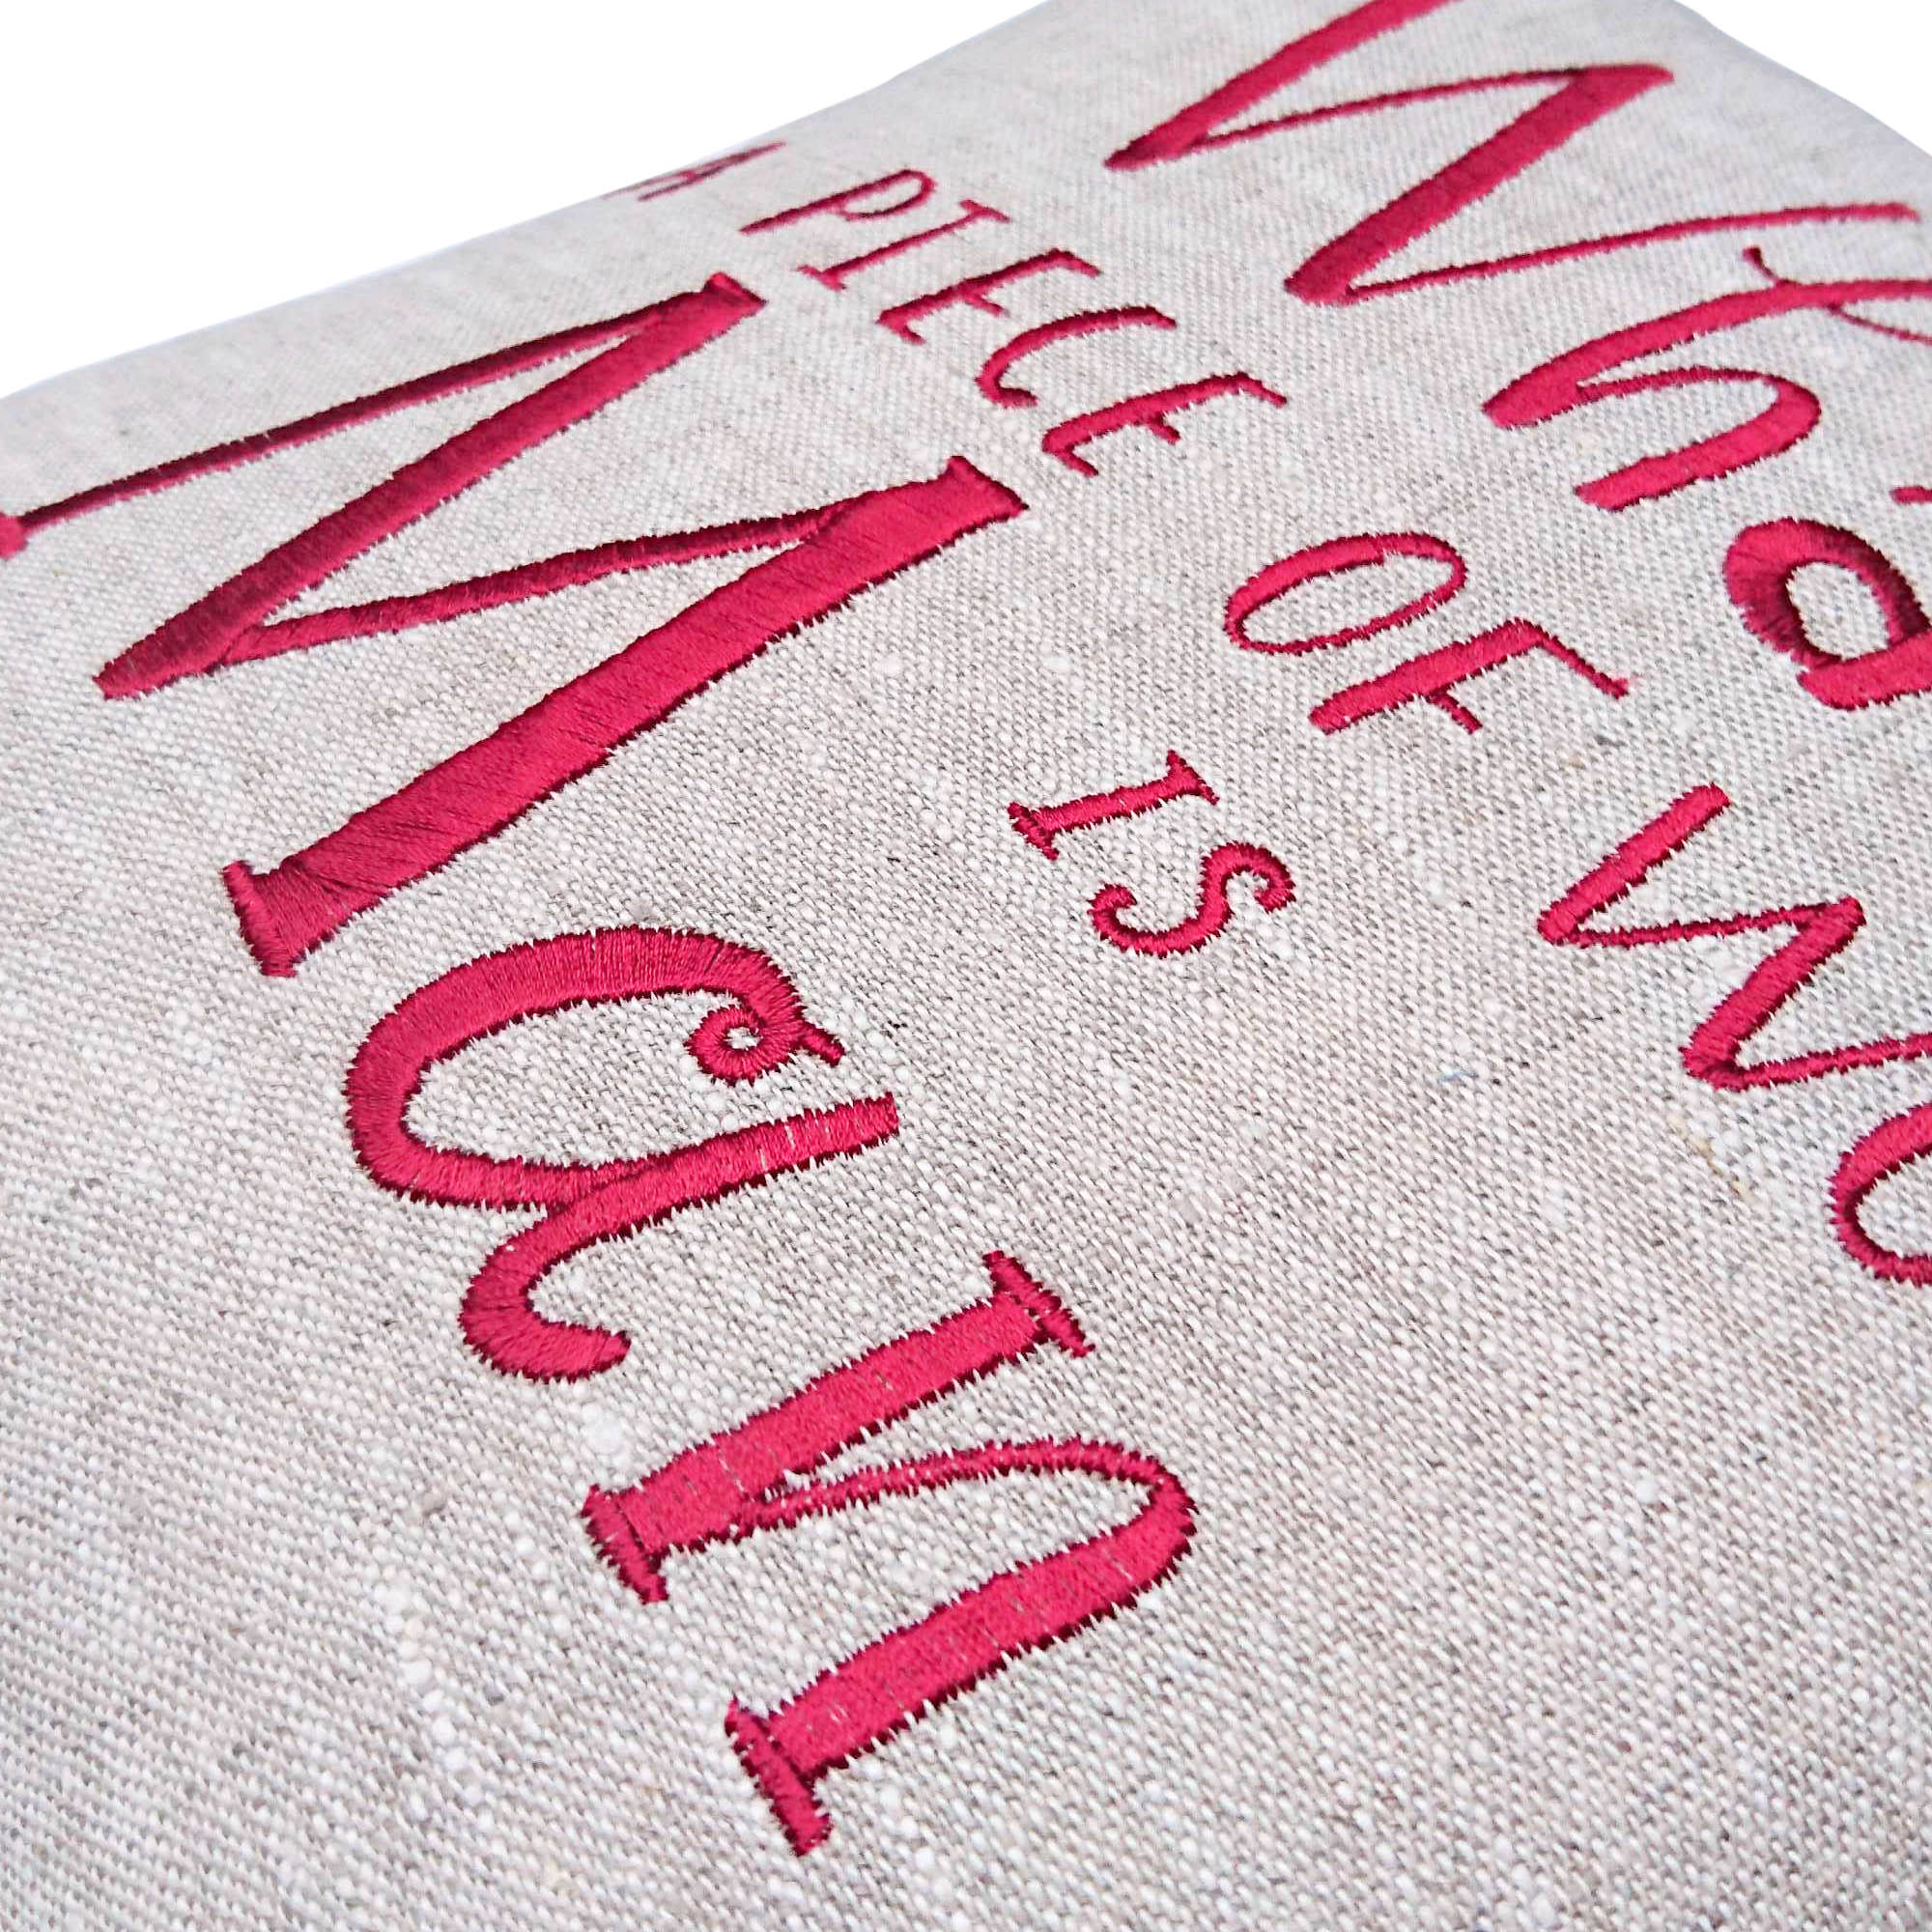 Emma Thompson Shakespeare Quote 'What a Piece of Work is Man' Cushion Red